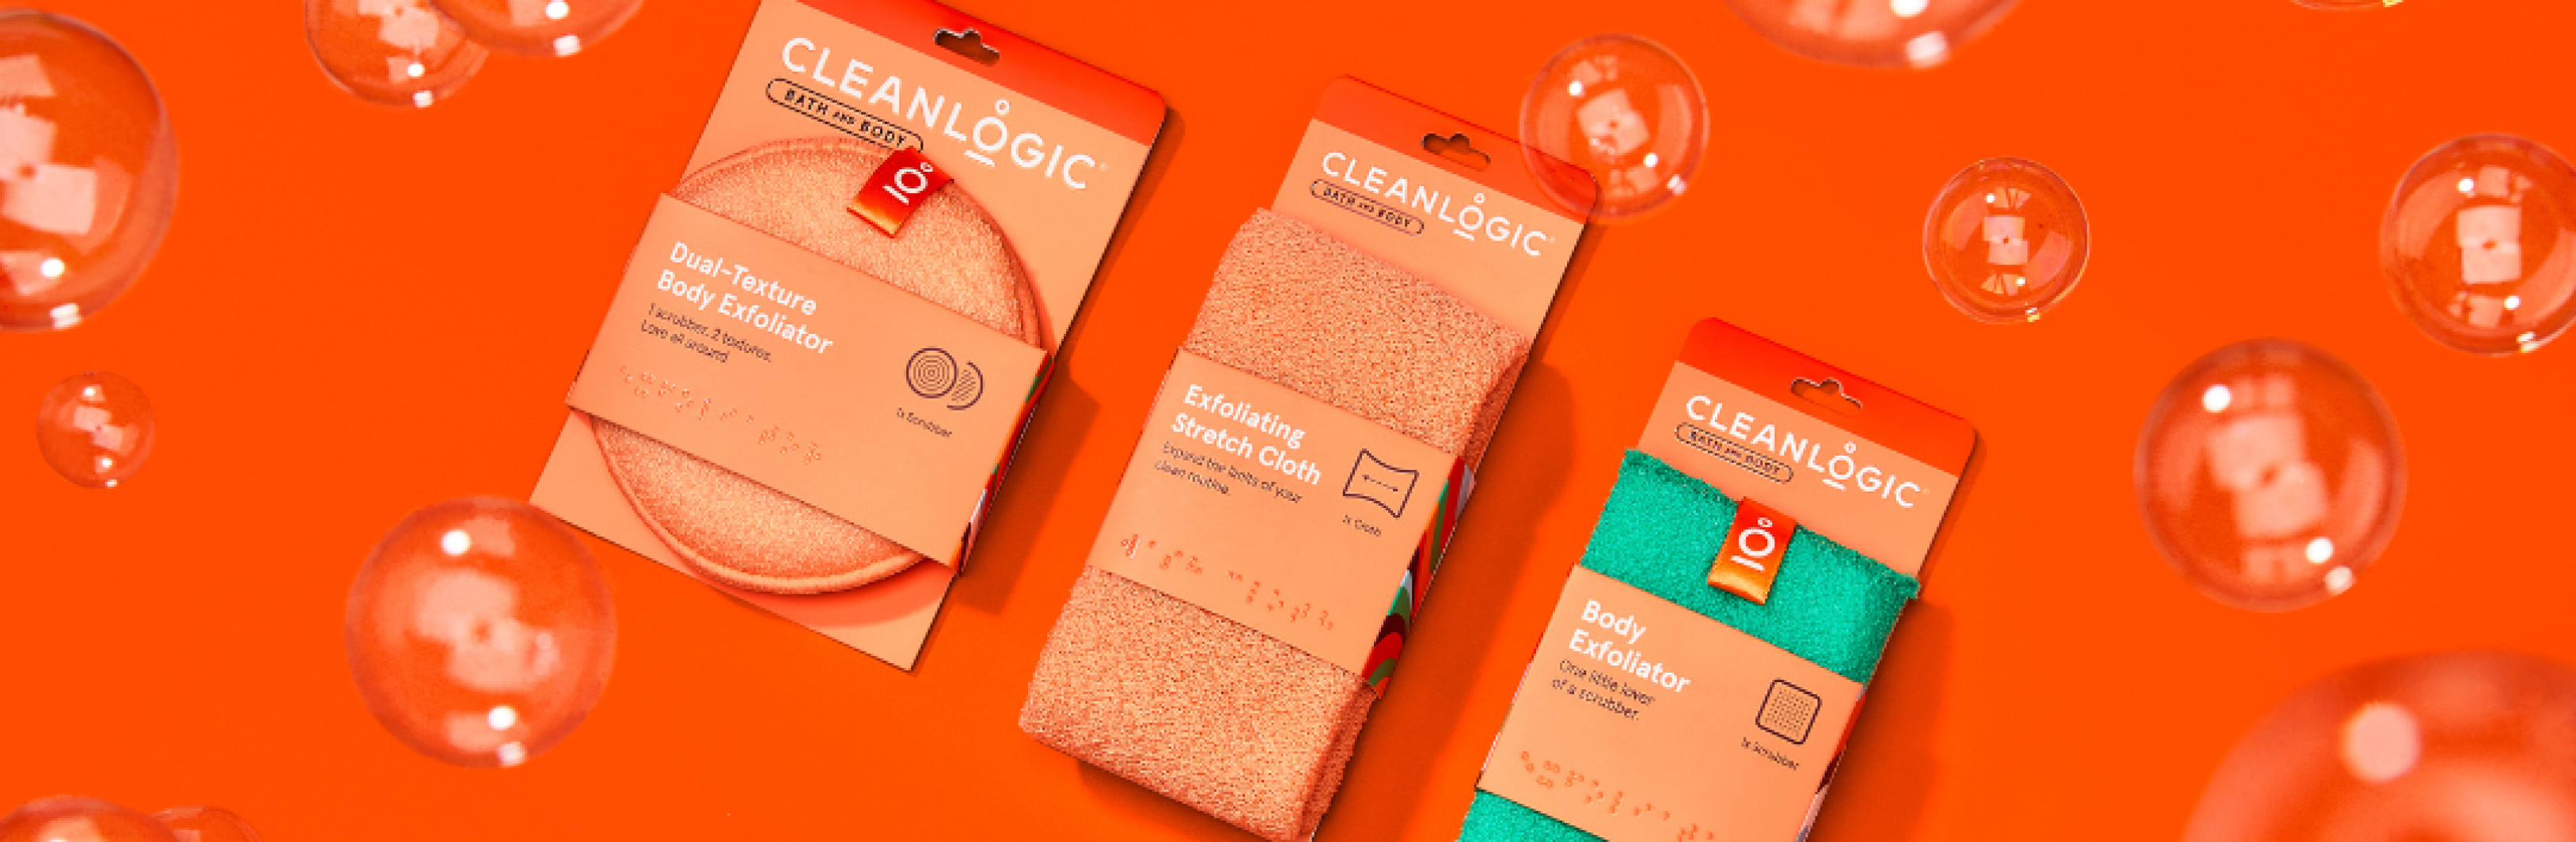 Cleanlogic products with orange background